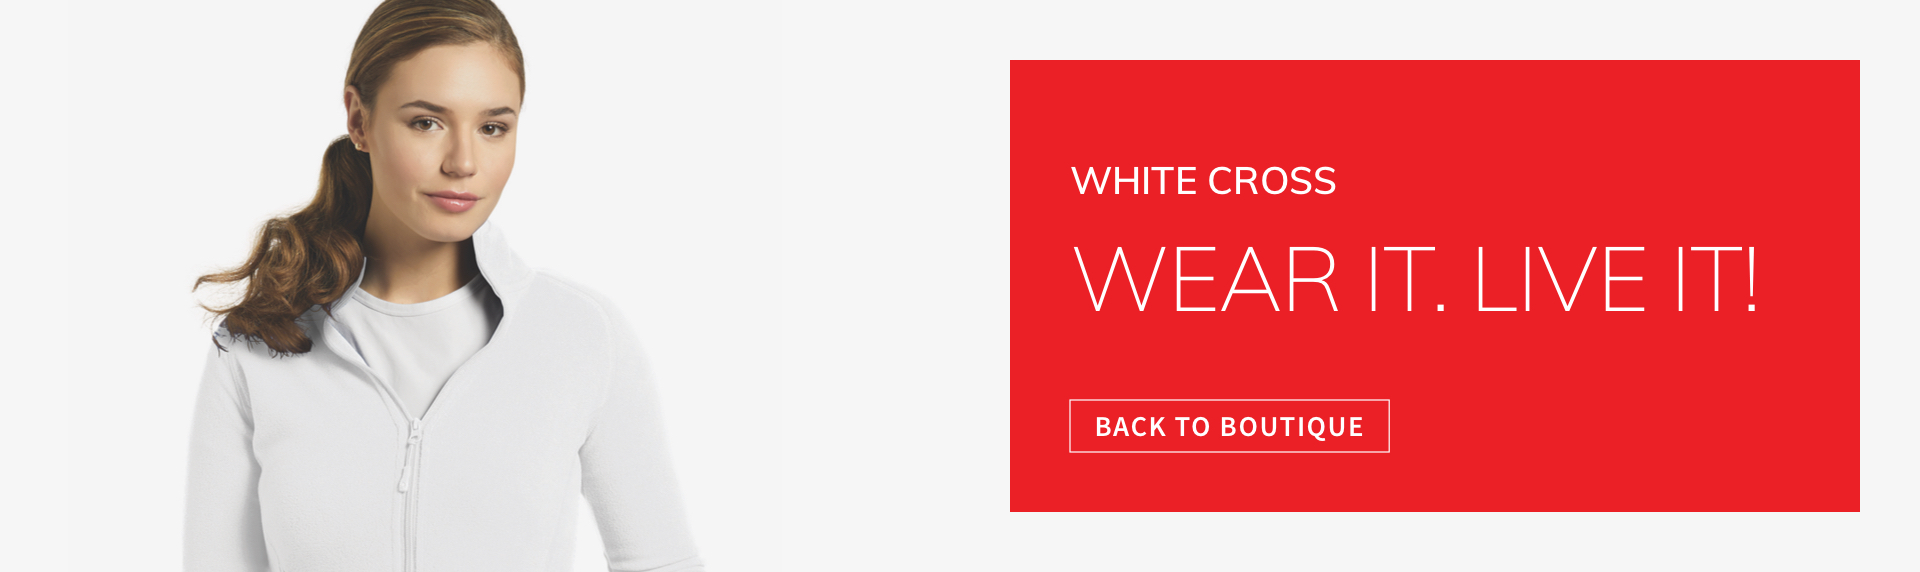 viewing all white cross products. click to go back to boutique.